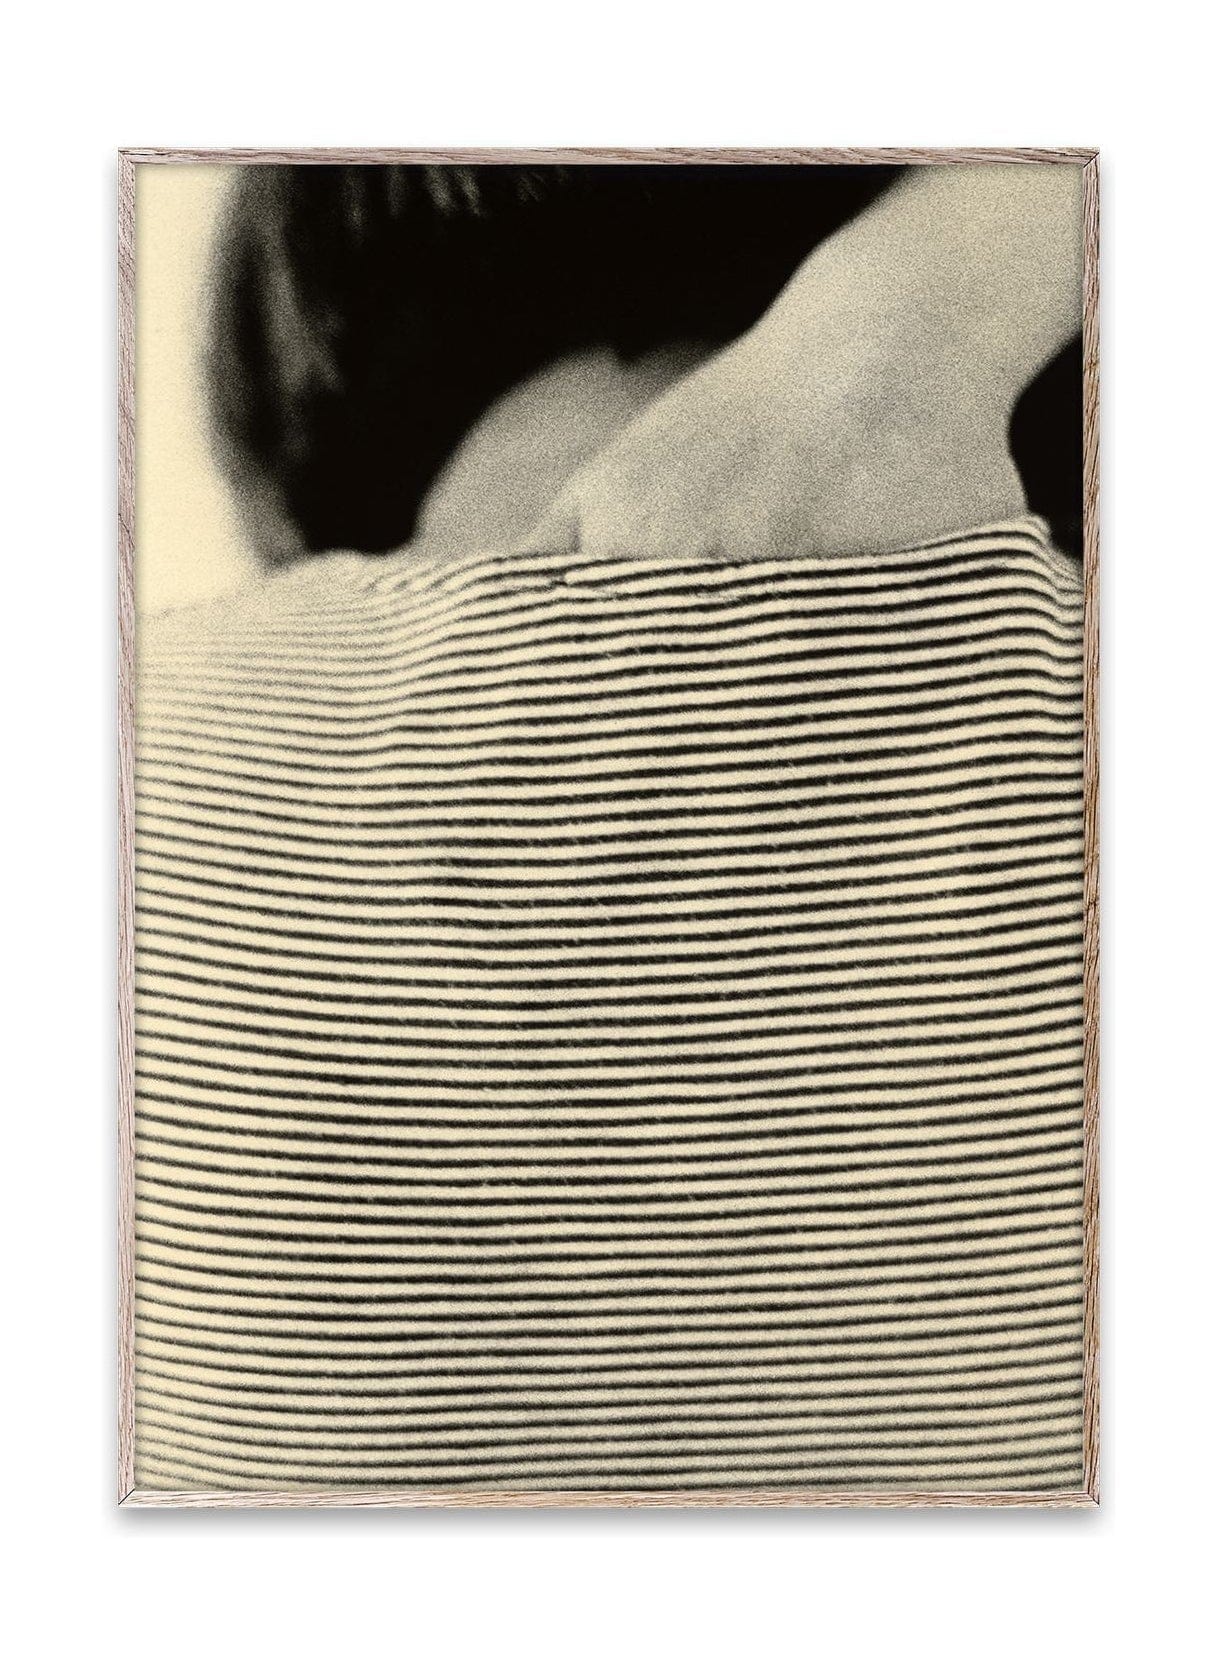 Paper Collective Striped Shirt Poster, 30x40 Cm